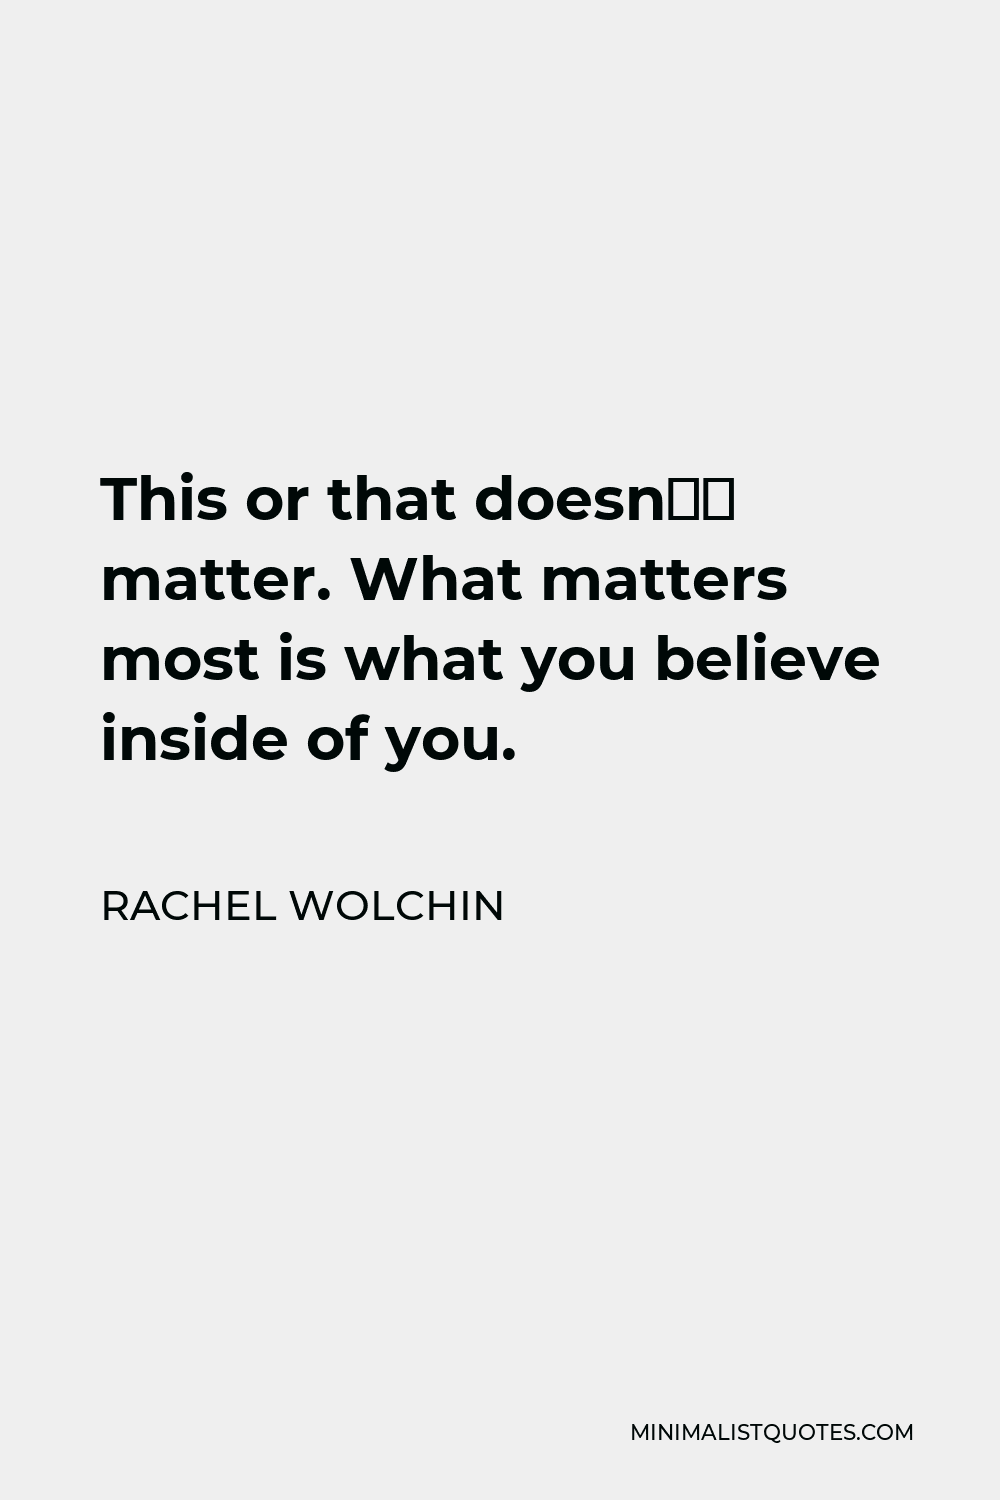 Rachel Wolchin Quote - This or that doesn’t matter. What matters most is what you believe inside of you.